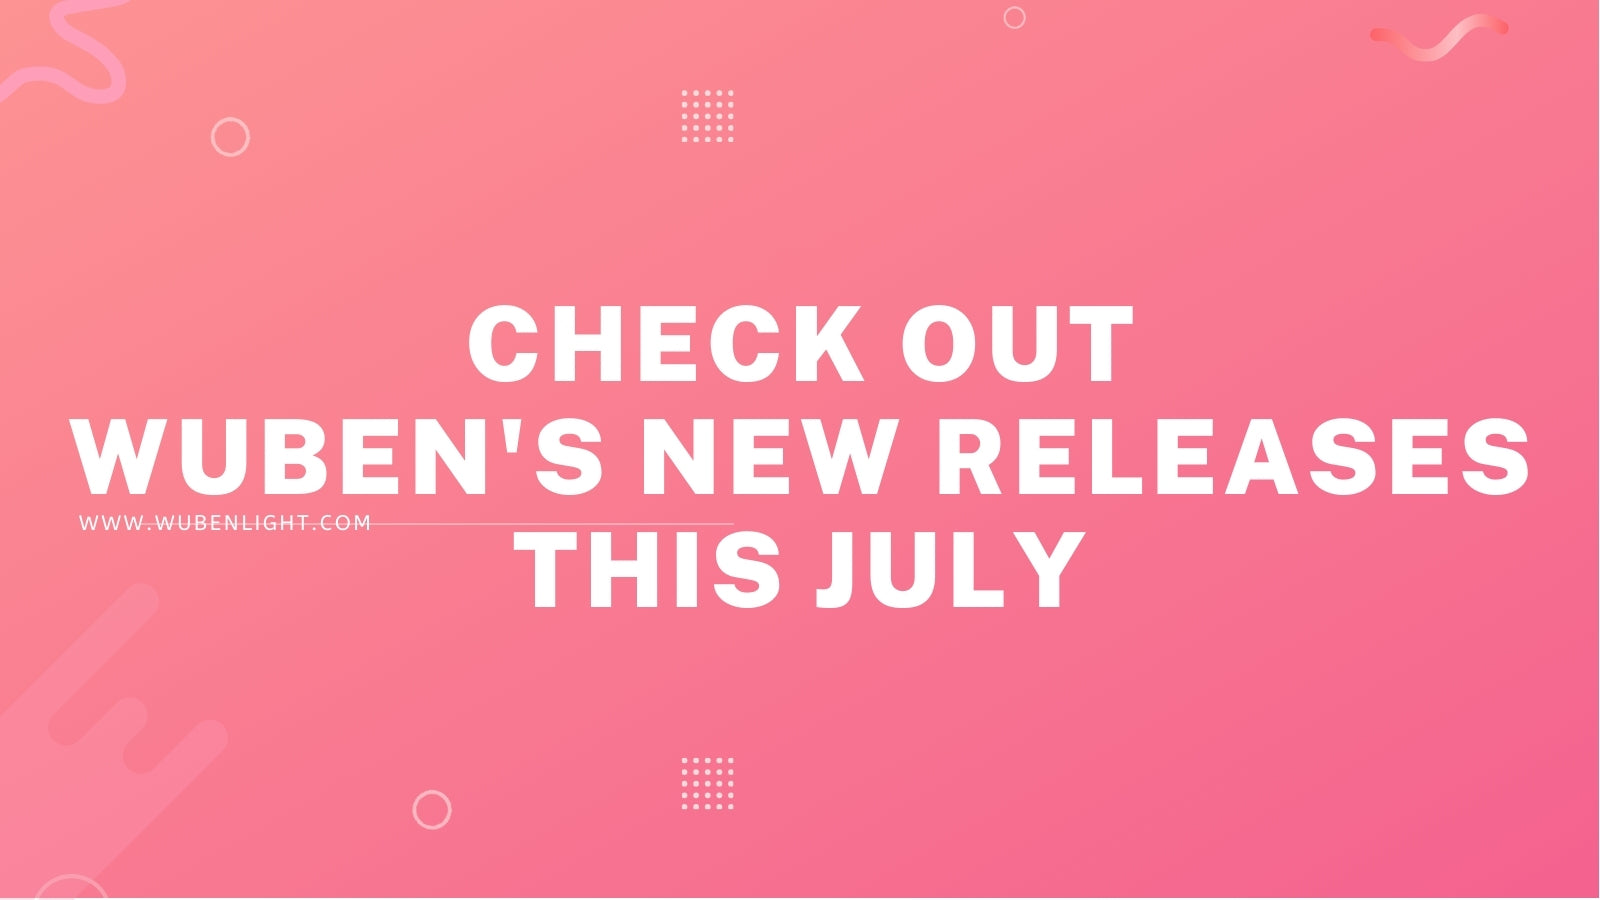 Wuben's new releases this July